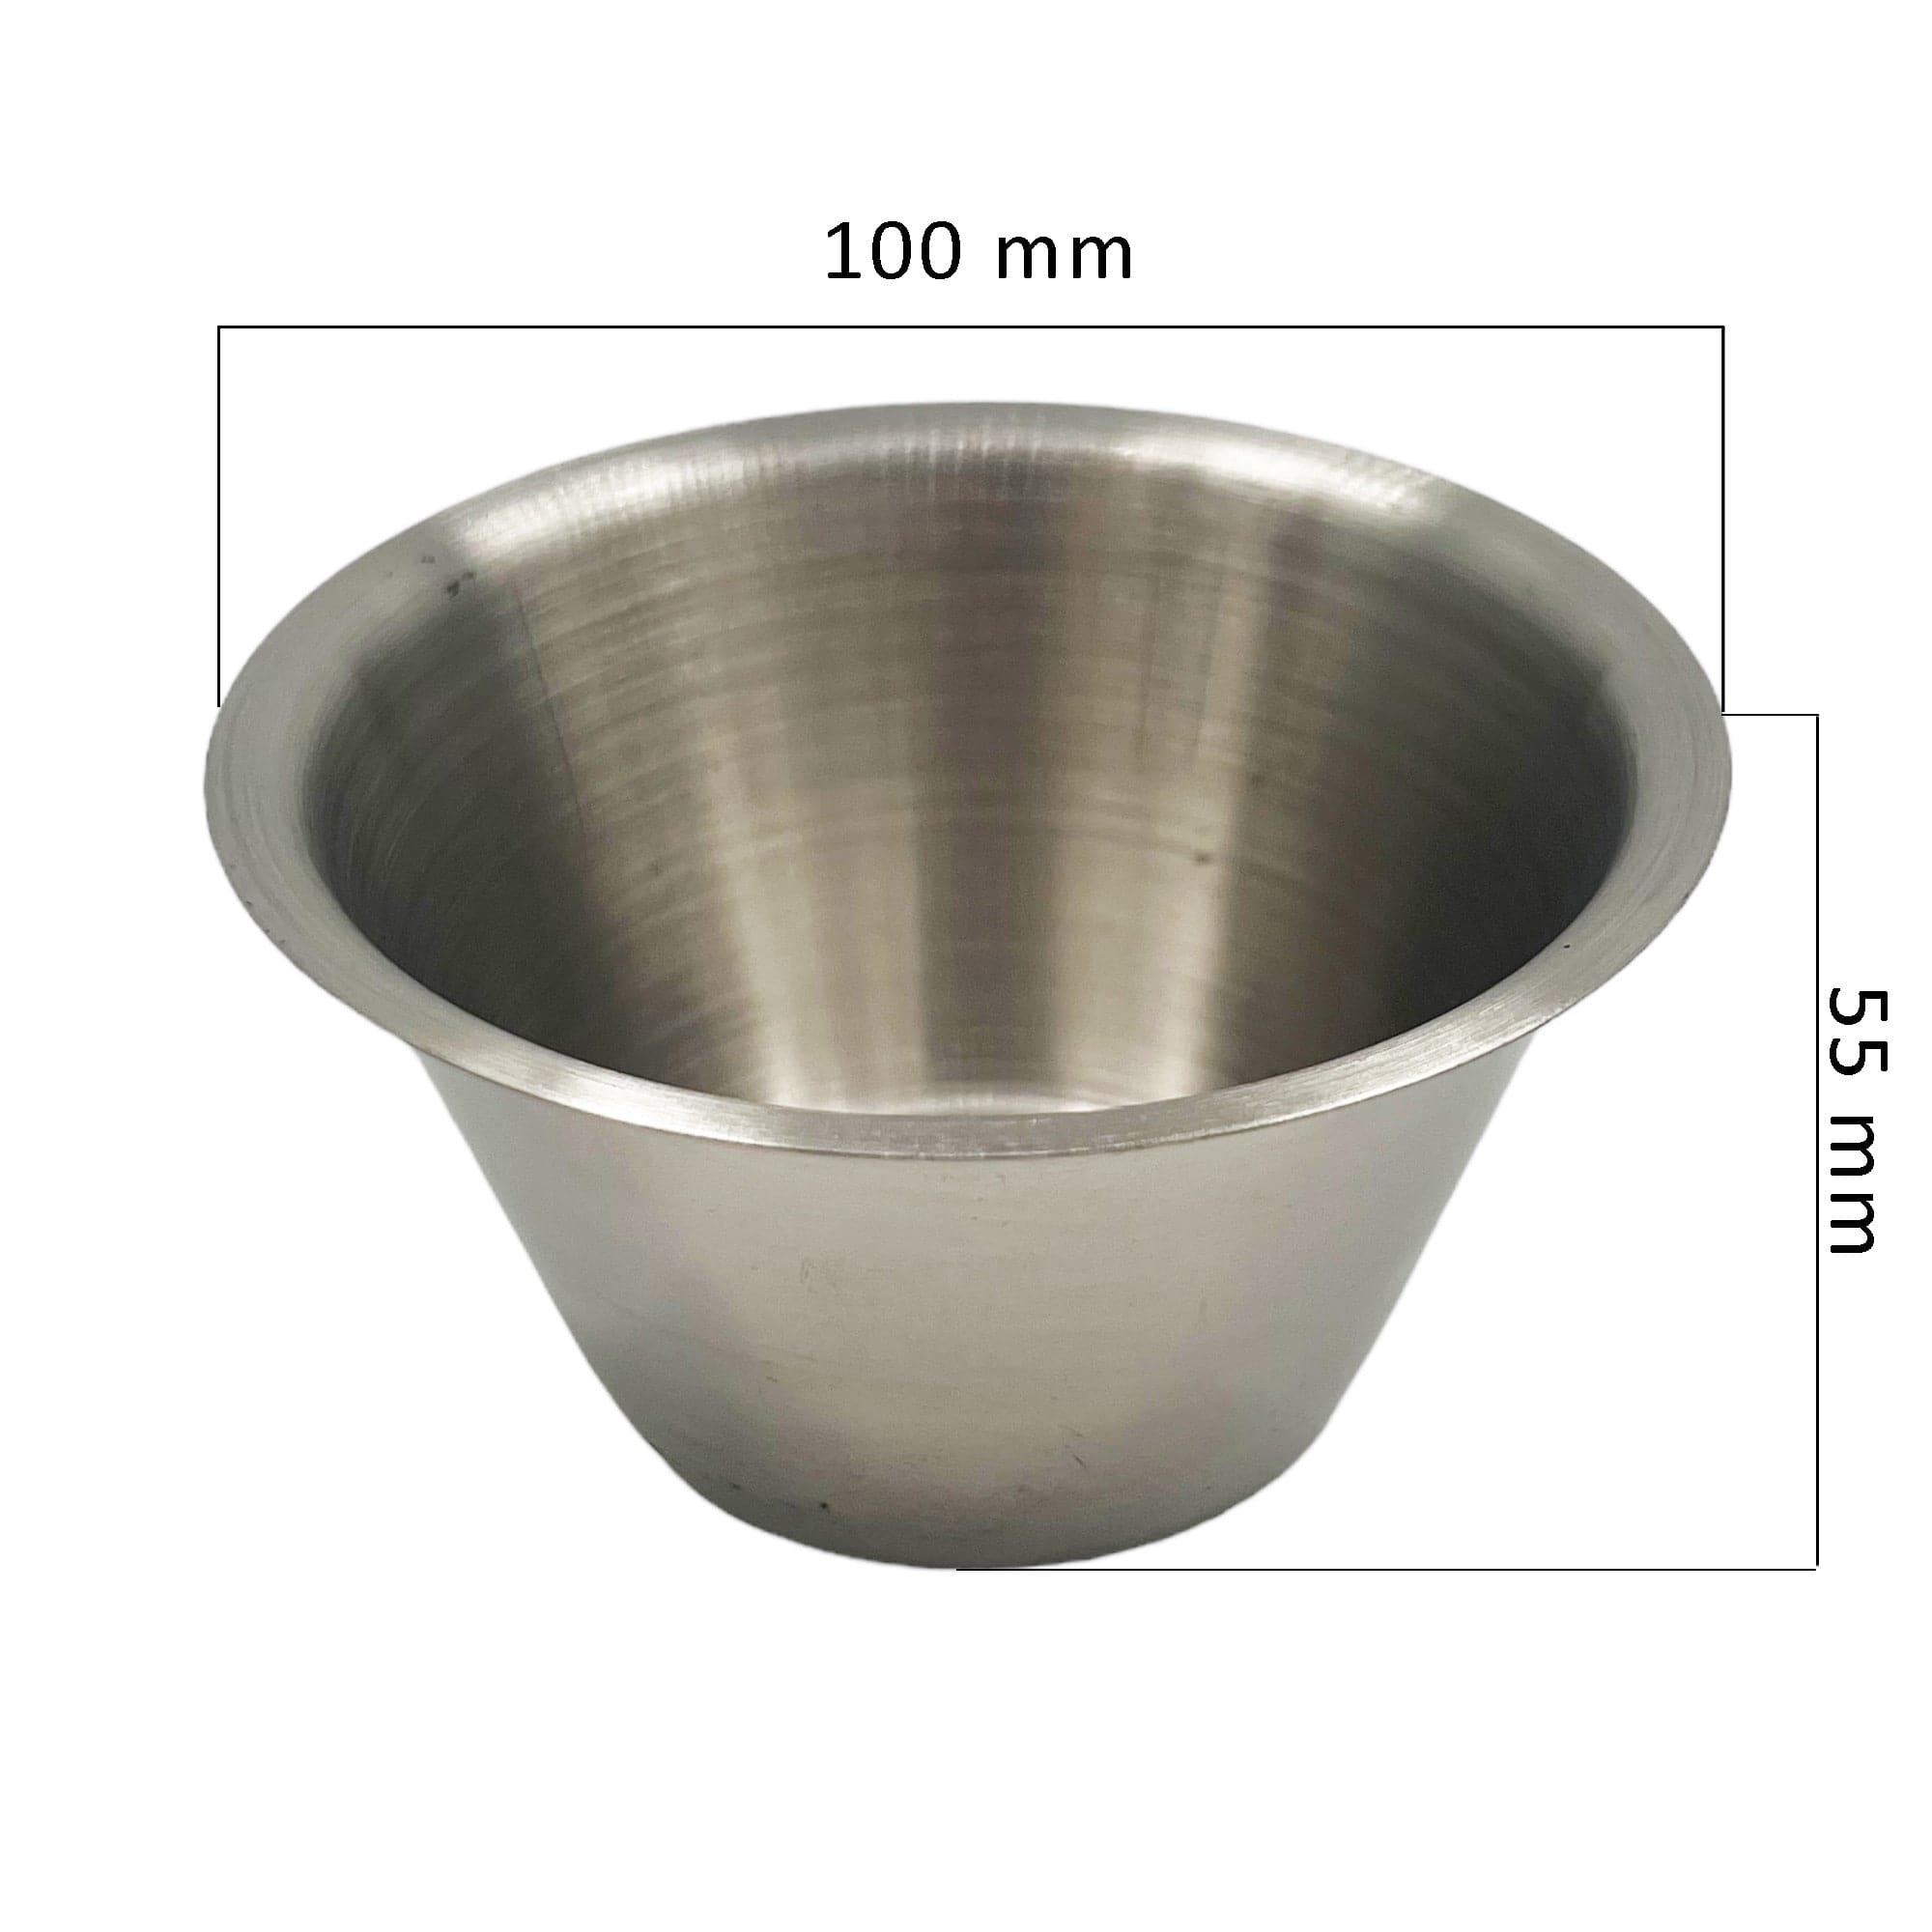 Eson - Stainless Steel Shaving Bowl Cup Silver 5.5x10cm - Eson Direct